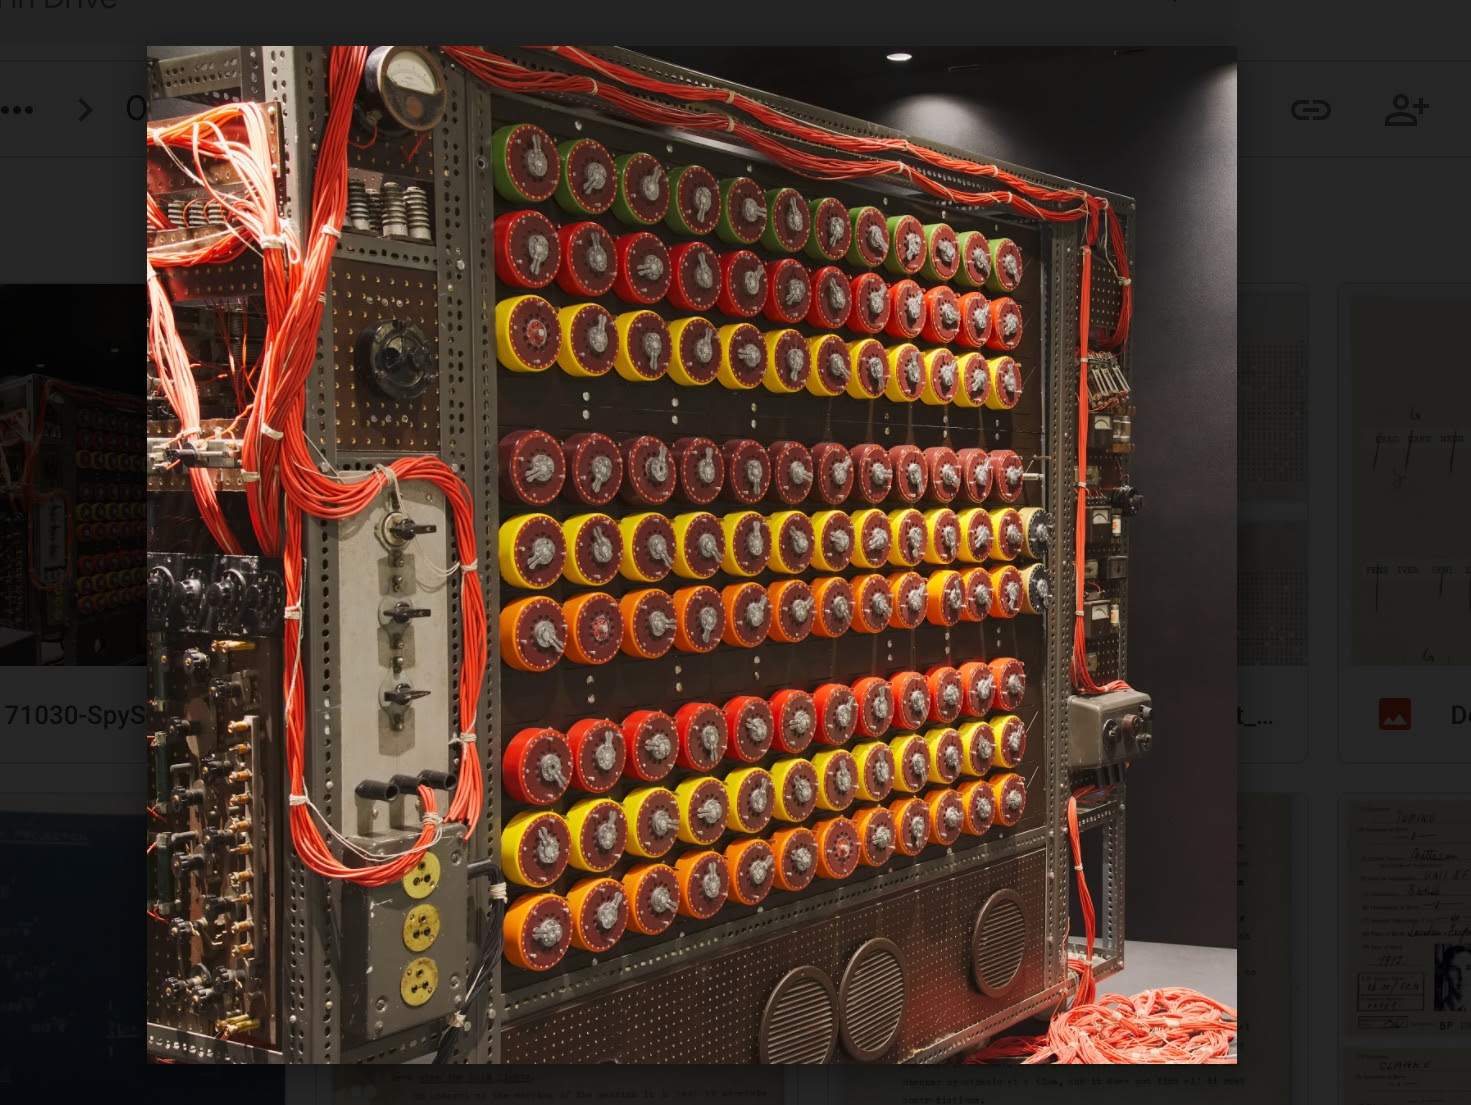 The Bletchley Park Bombe machine to decipher German codes